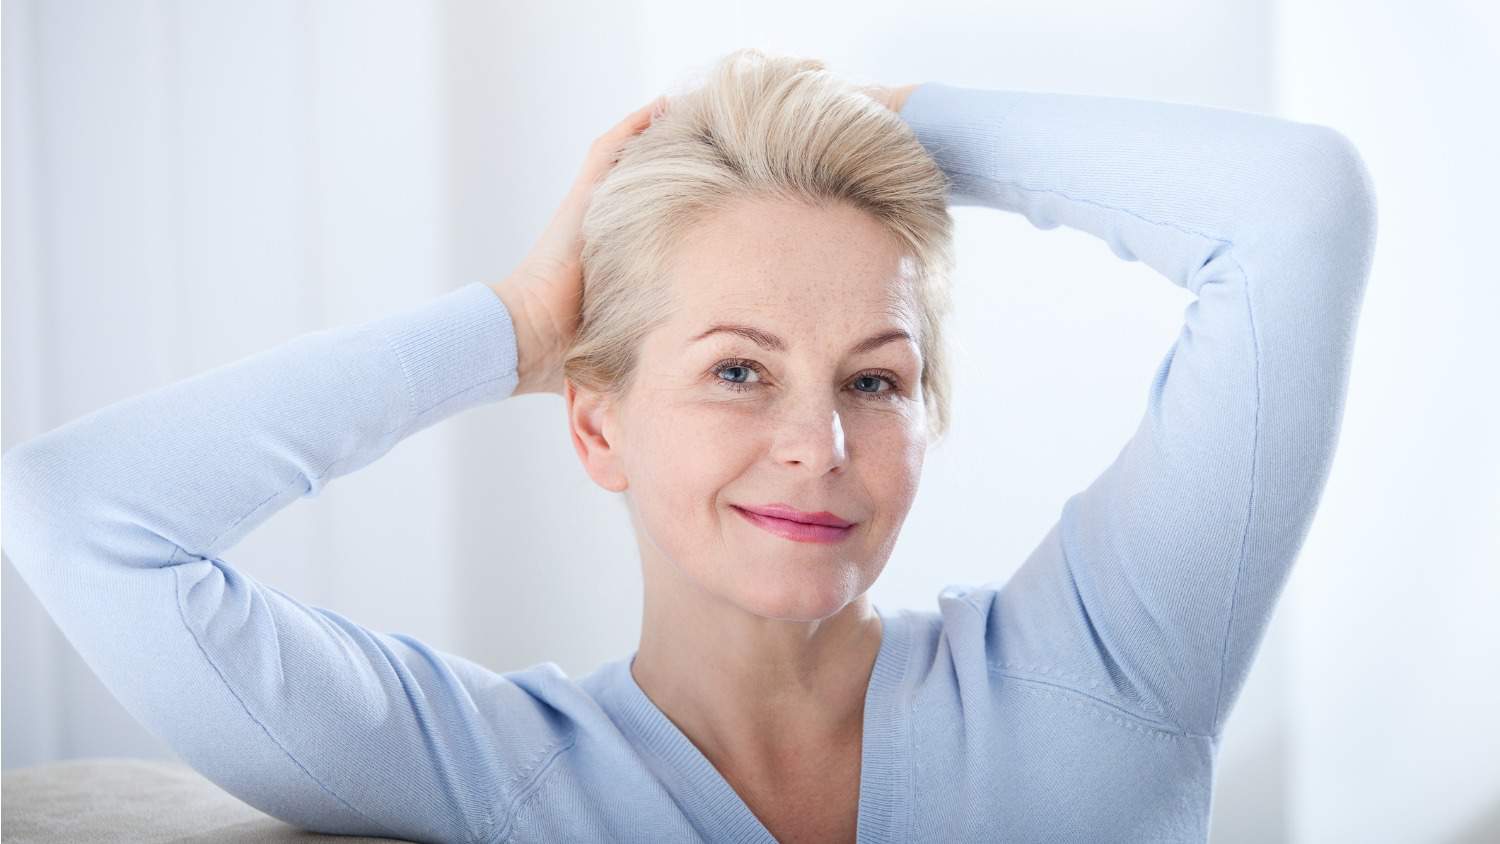 7 Secrets to Keeping Your Hair Healthy, While Aging on Your Own Terms